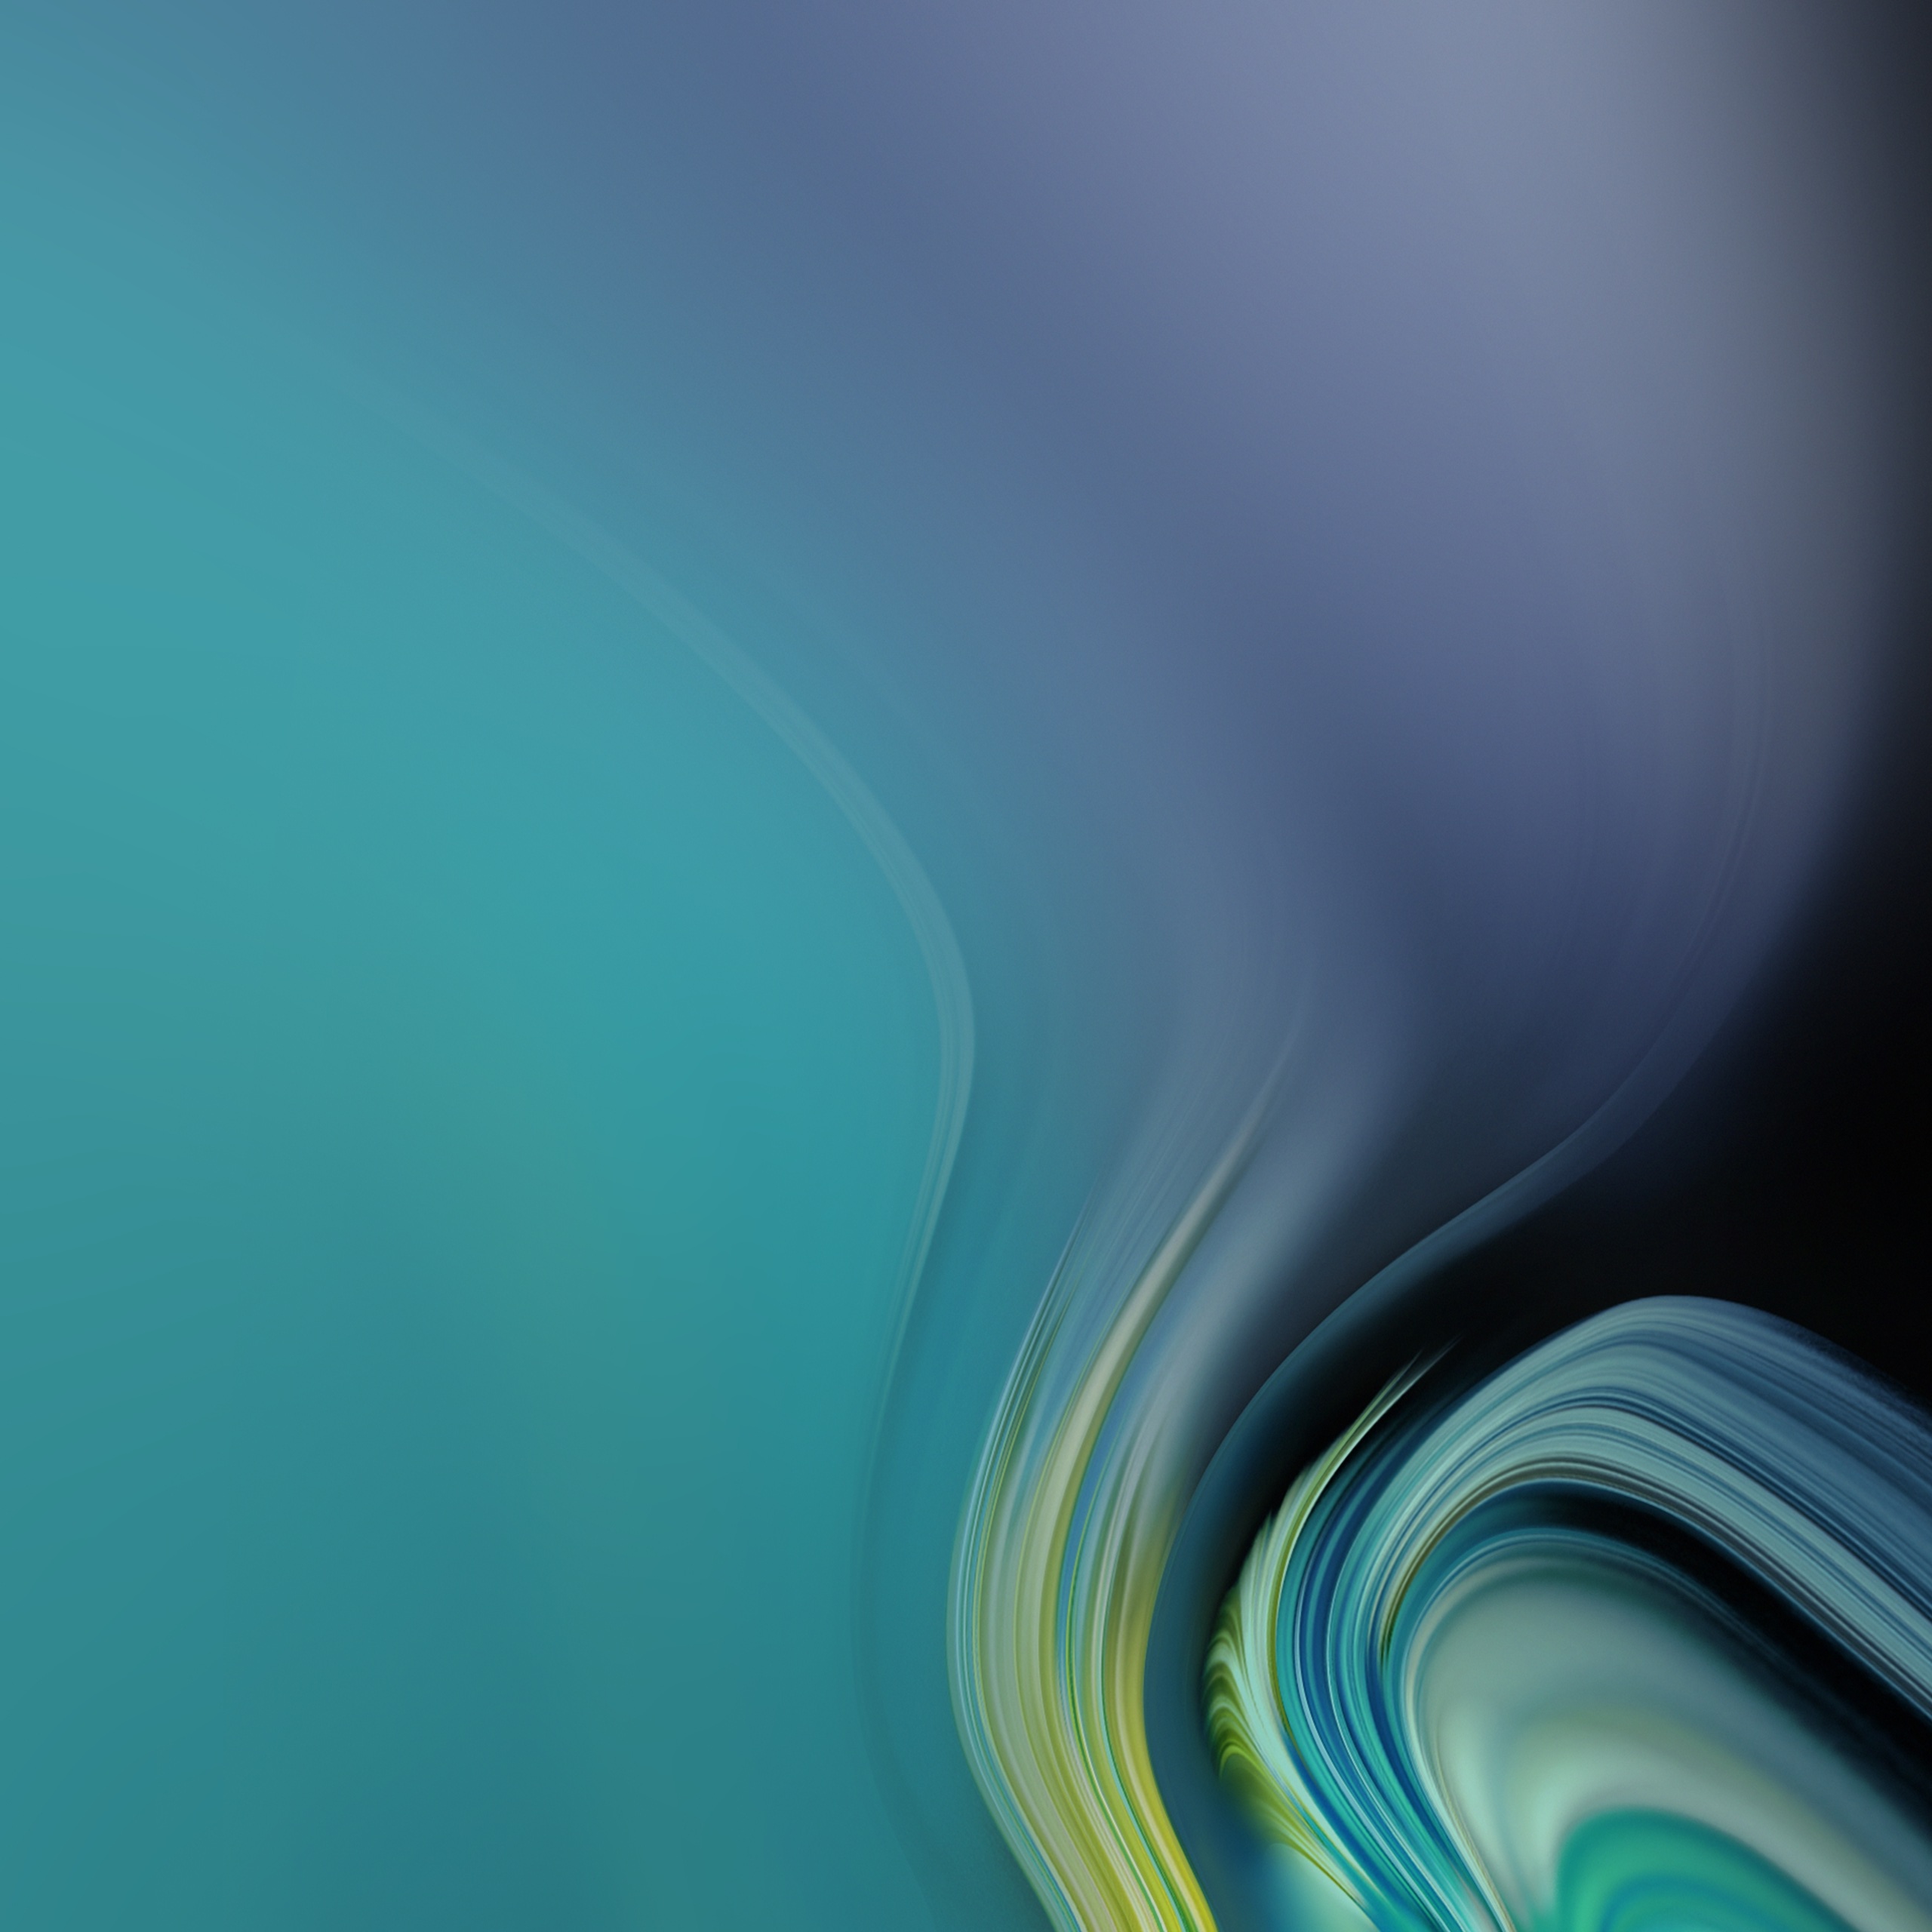 Samsung Galaxy Note Wallpaper Are Here All In Full Resolution